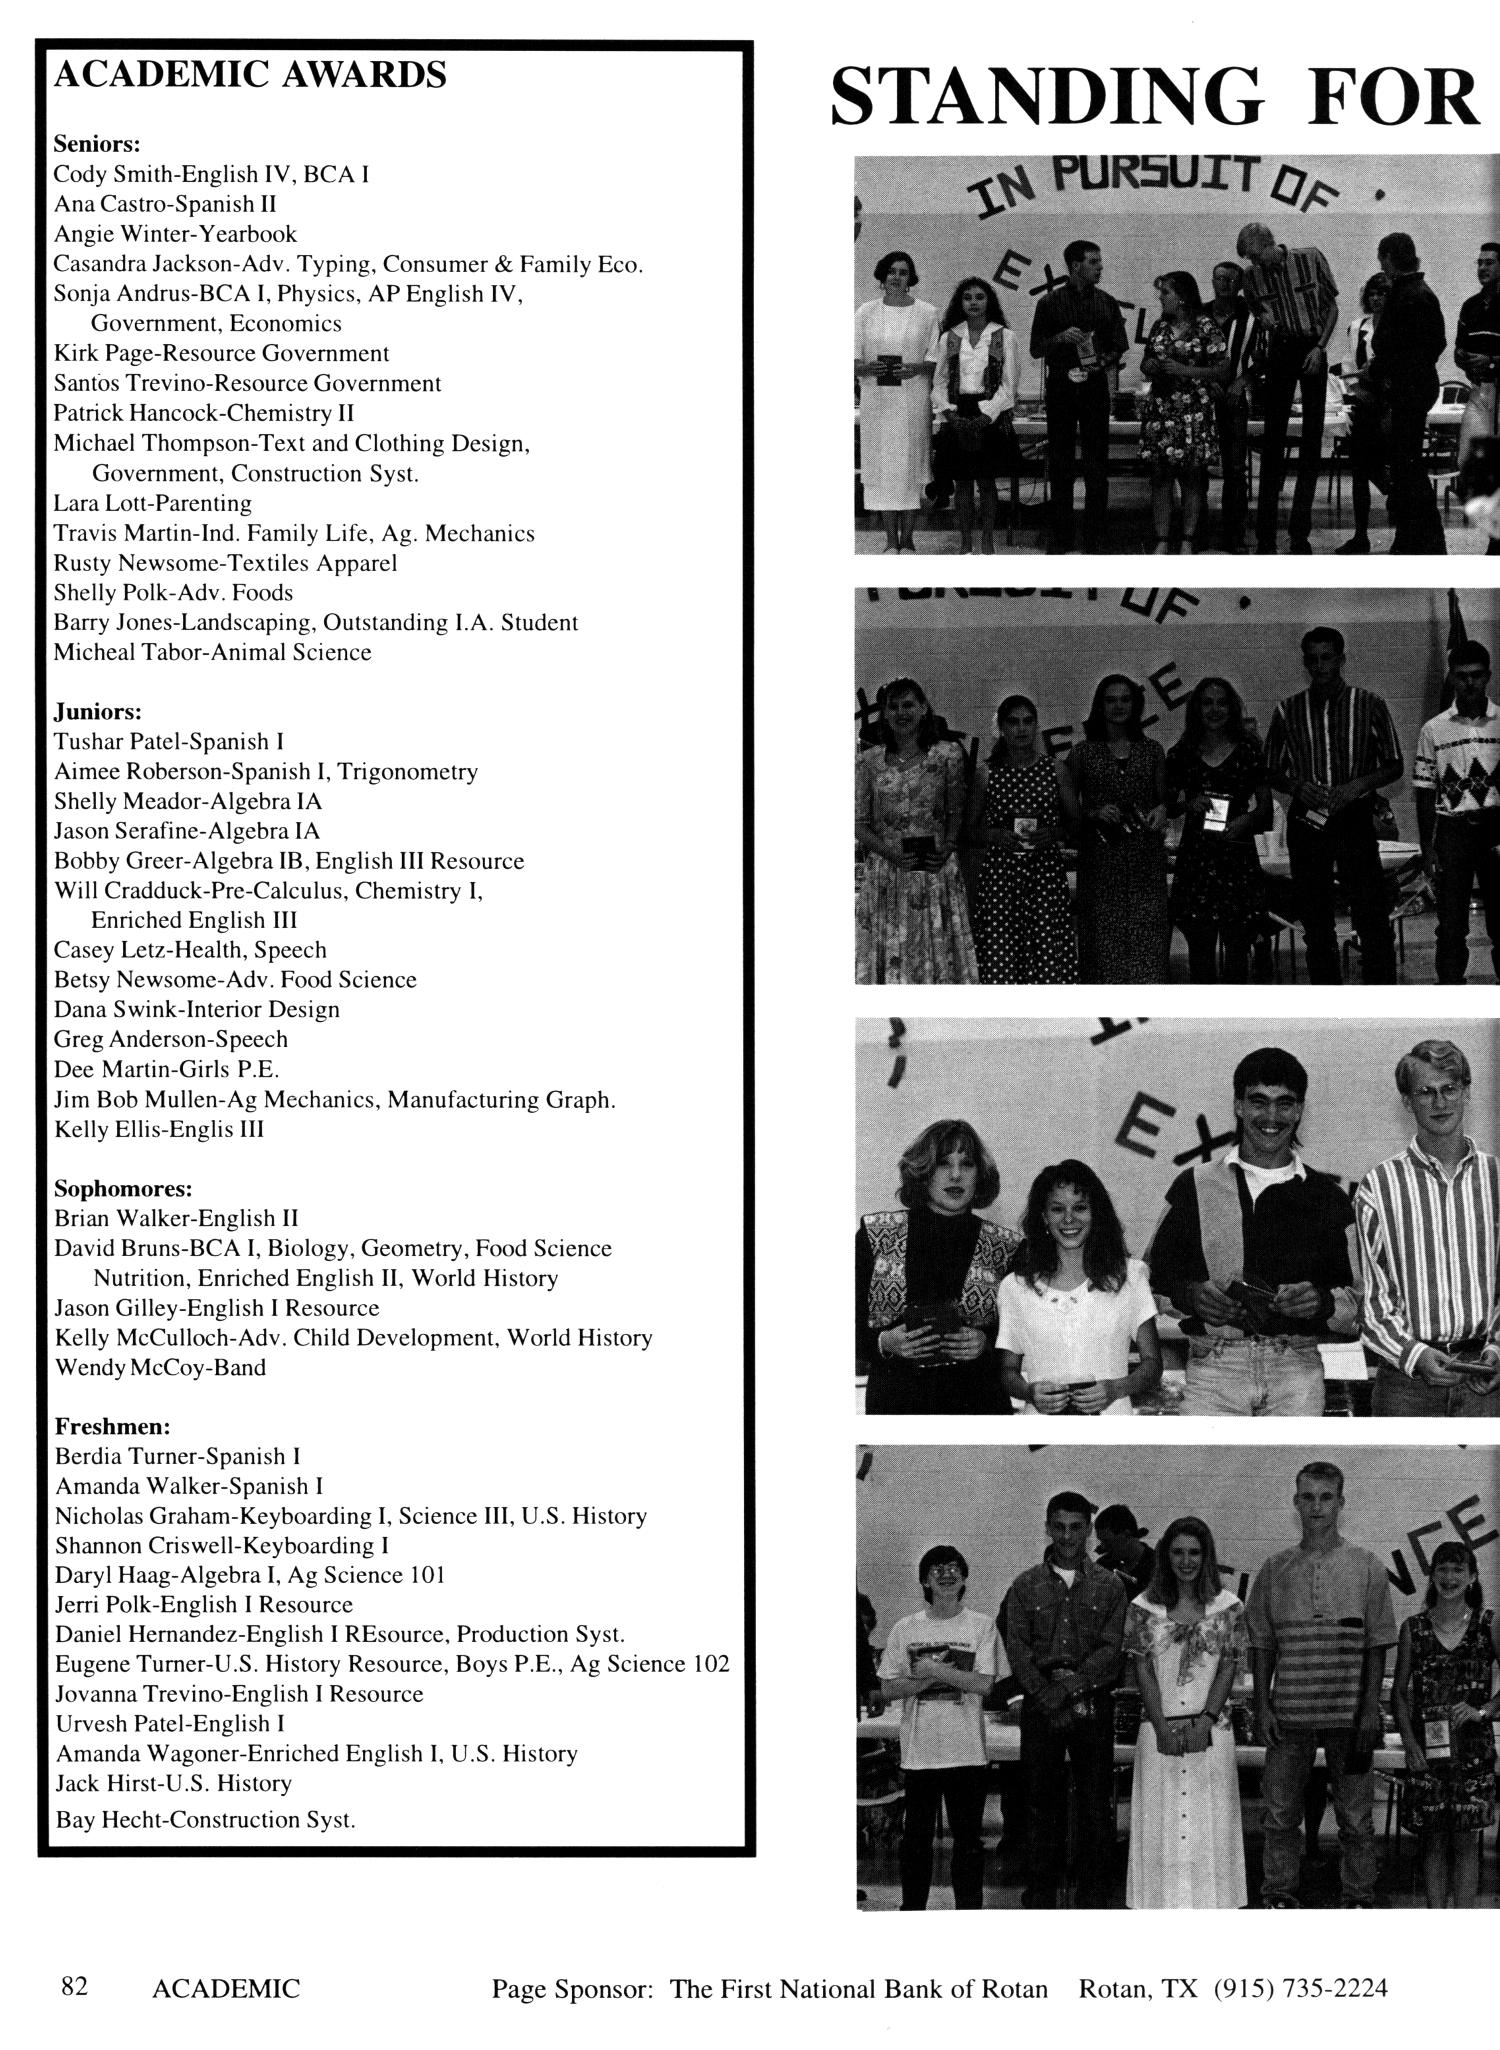 The Hornet, Yearbook of Aspermont Students, 1994
                                                
                                                    82
                                                